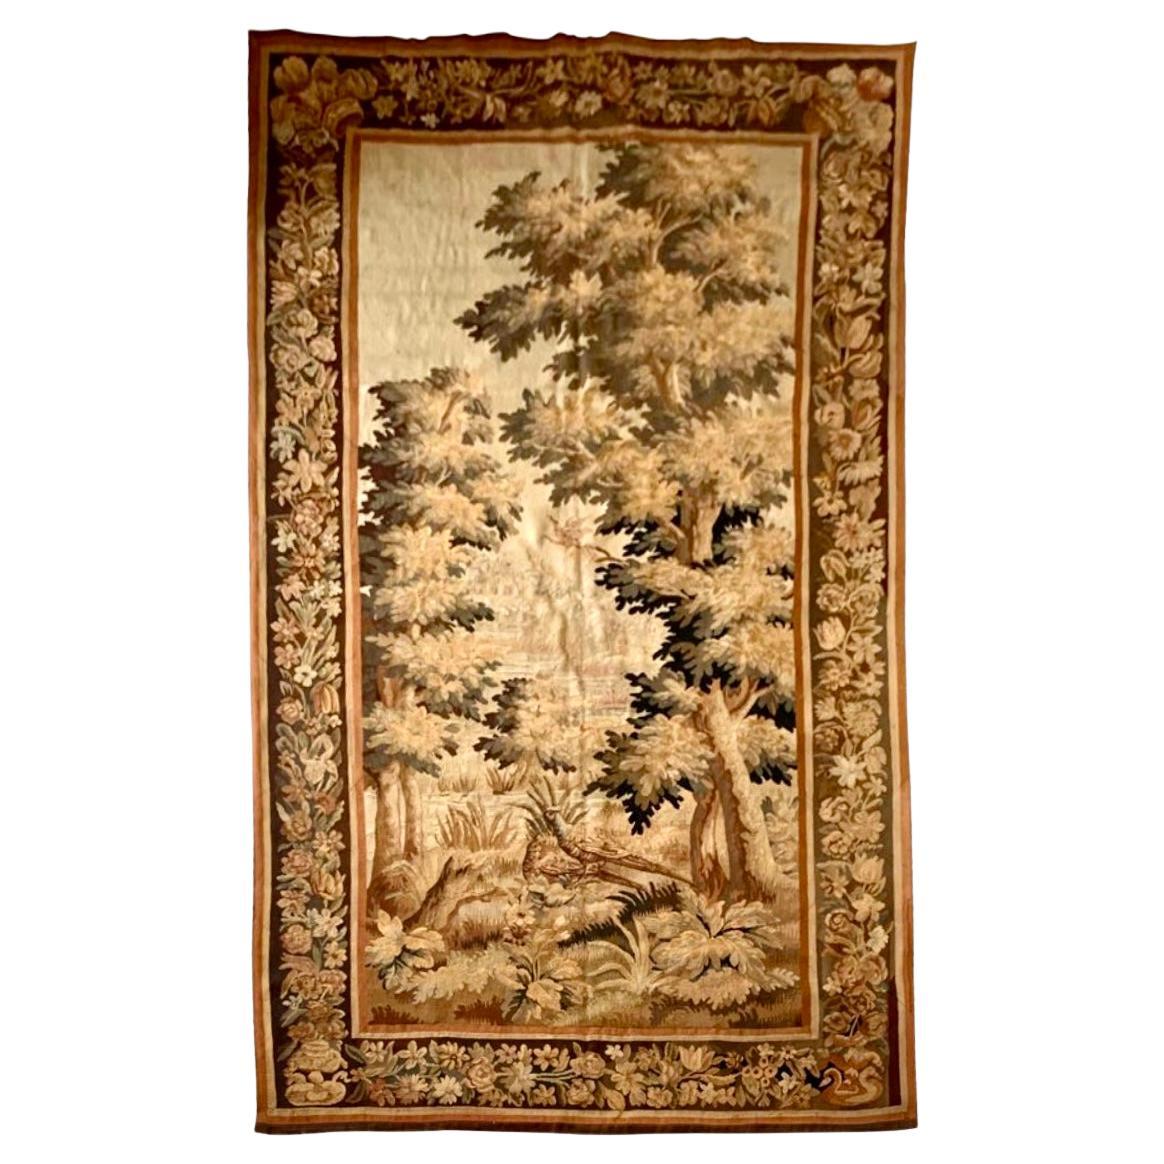 Antique 19th Century French Verdure Landscape Tapestry